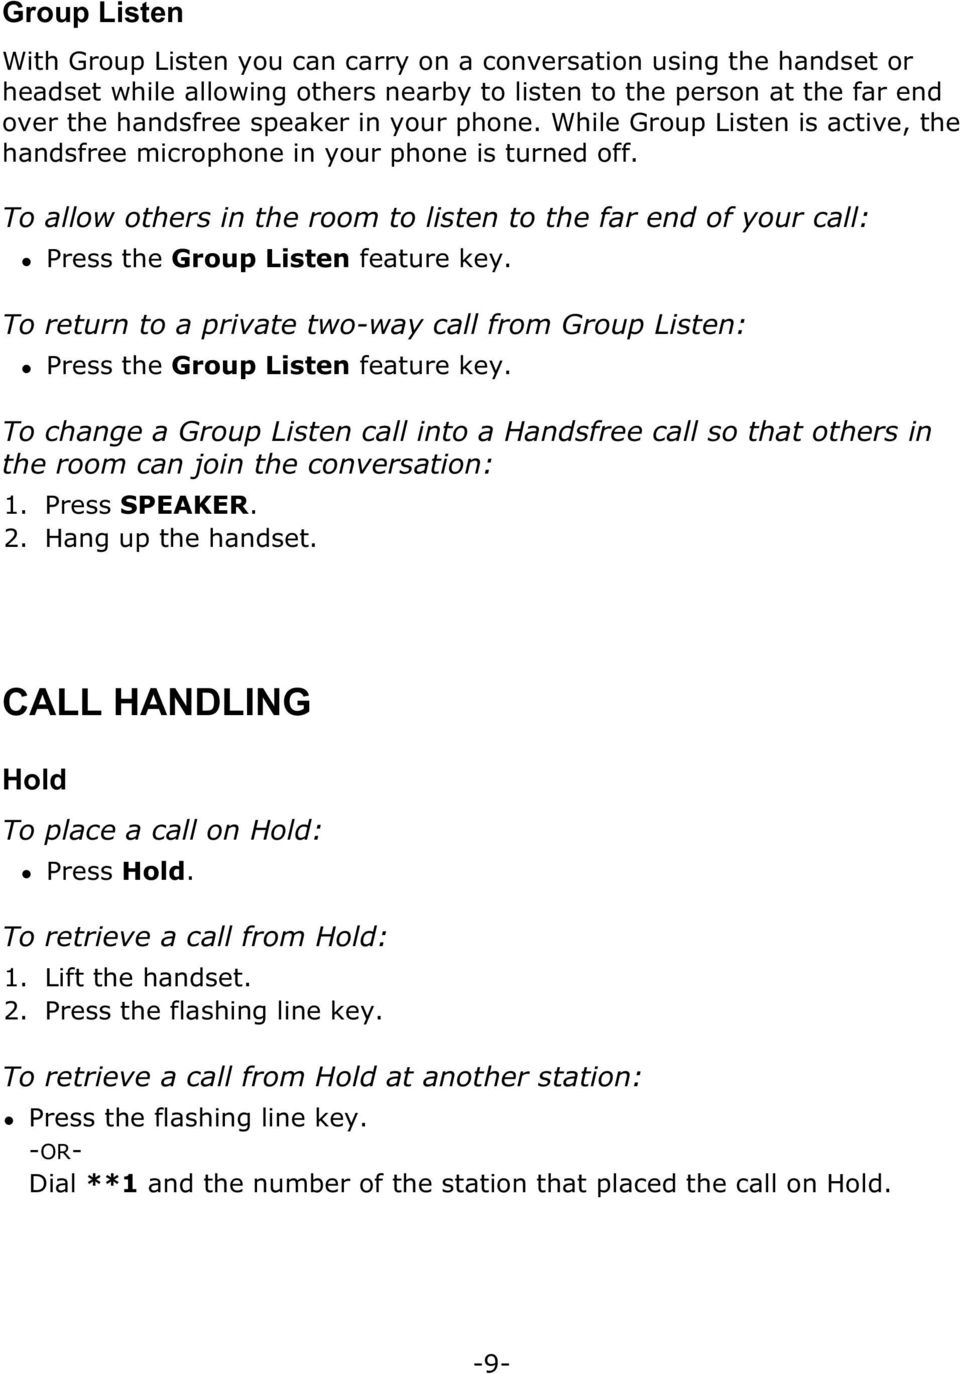 To return to a private two-way call from Group Listen: Press the Group Listen feature key. To change a Group Listen call into a Handsfree call so that others in the room can join the conversation: 1.